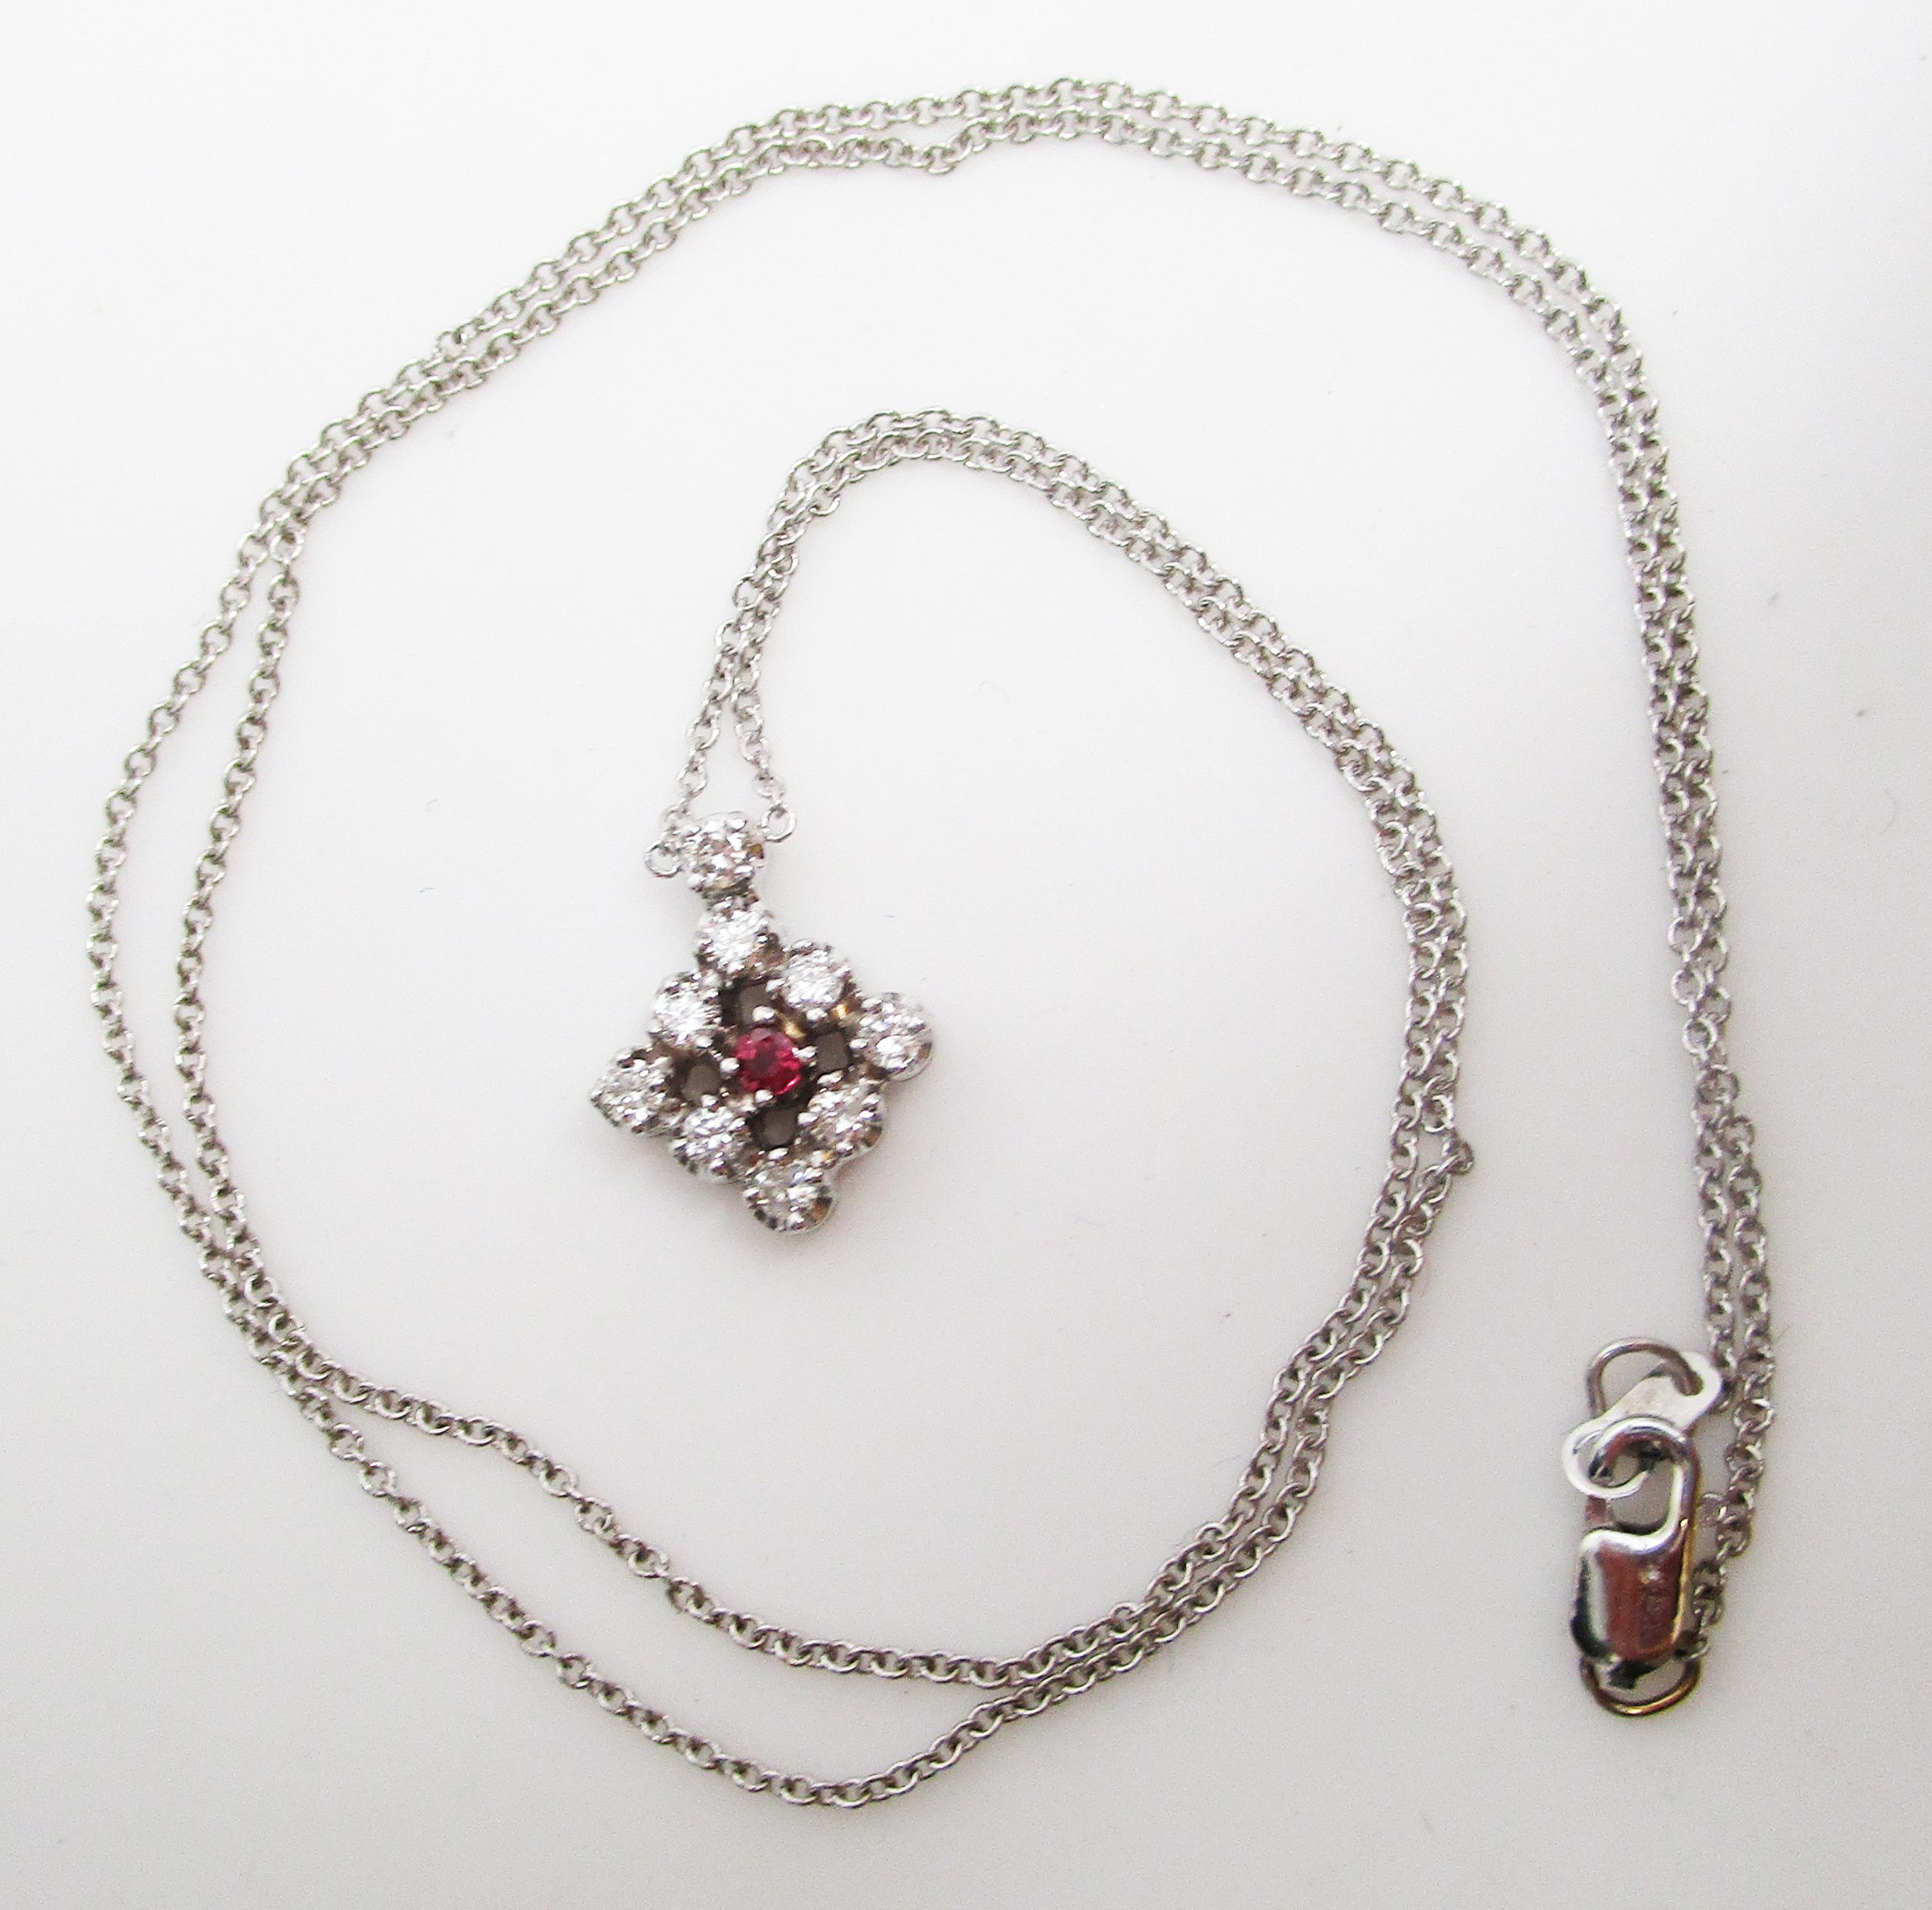 Women's 1950s, 14K White Gold Ruby and Diamond Necklace